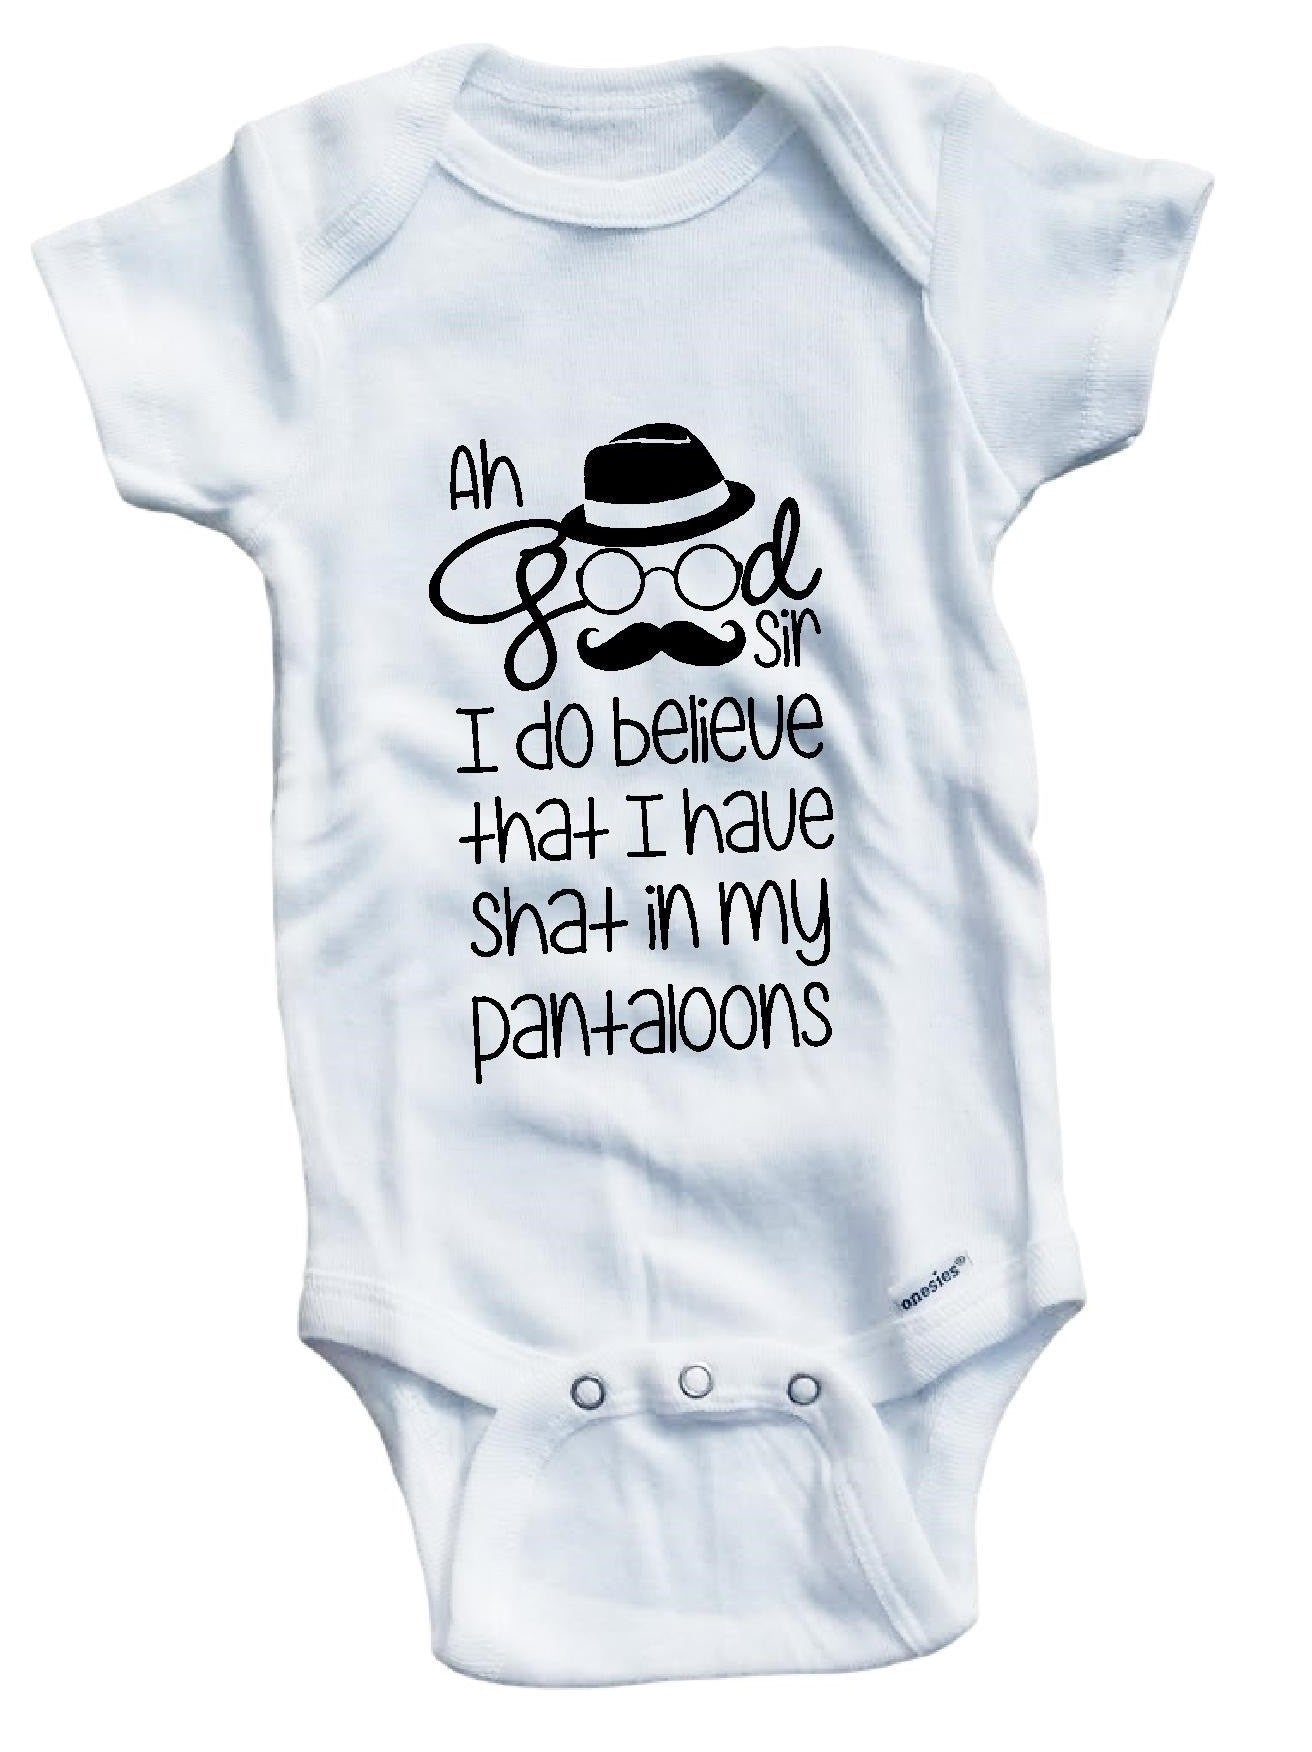 cute funny baby clothes